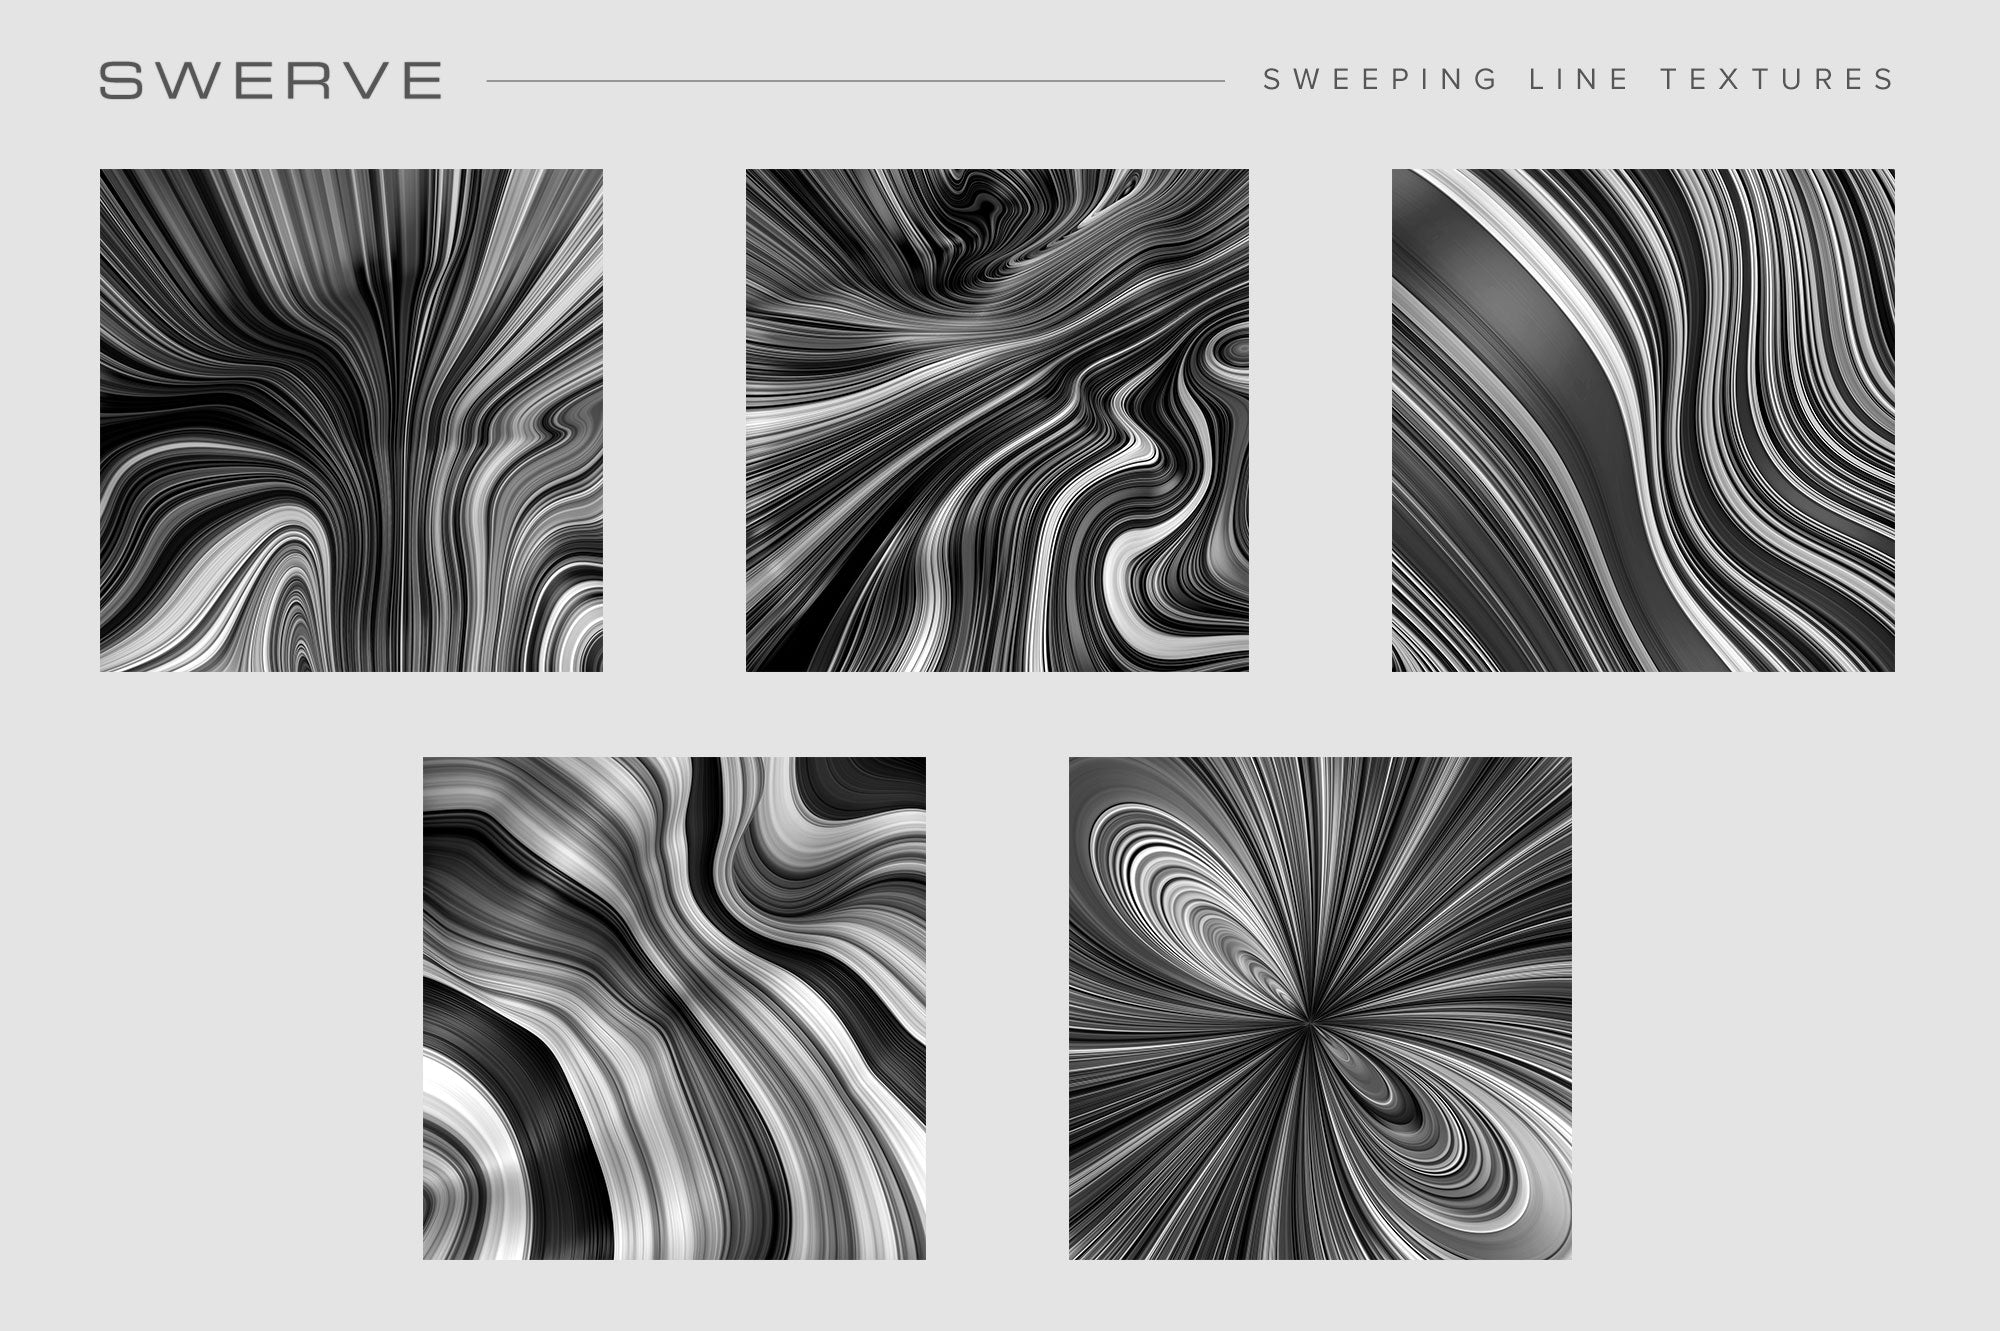 Swerve: Sweeping Line Textures